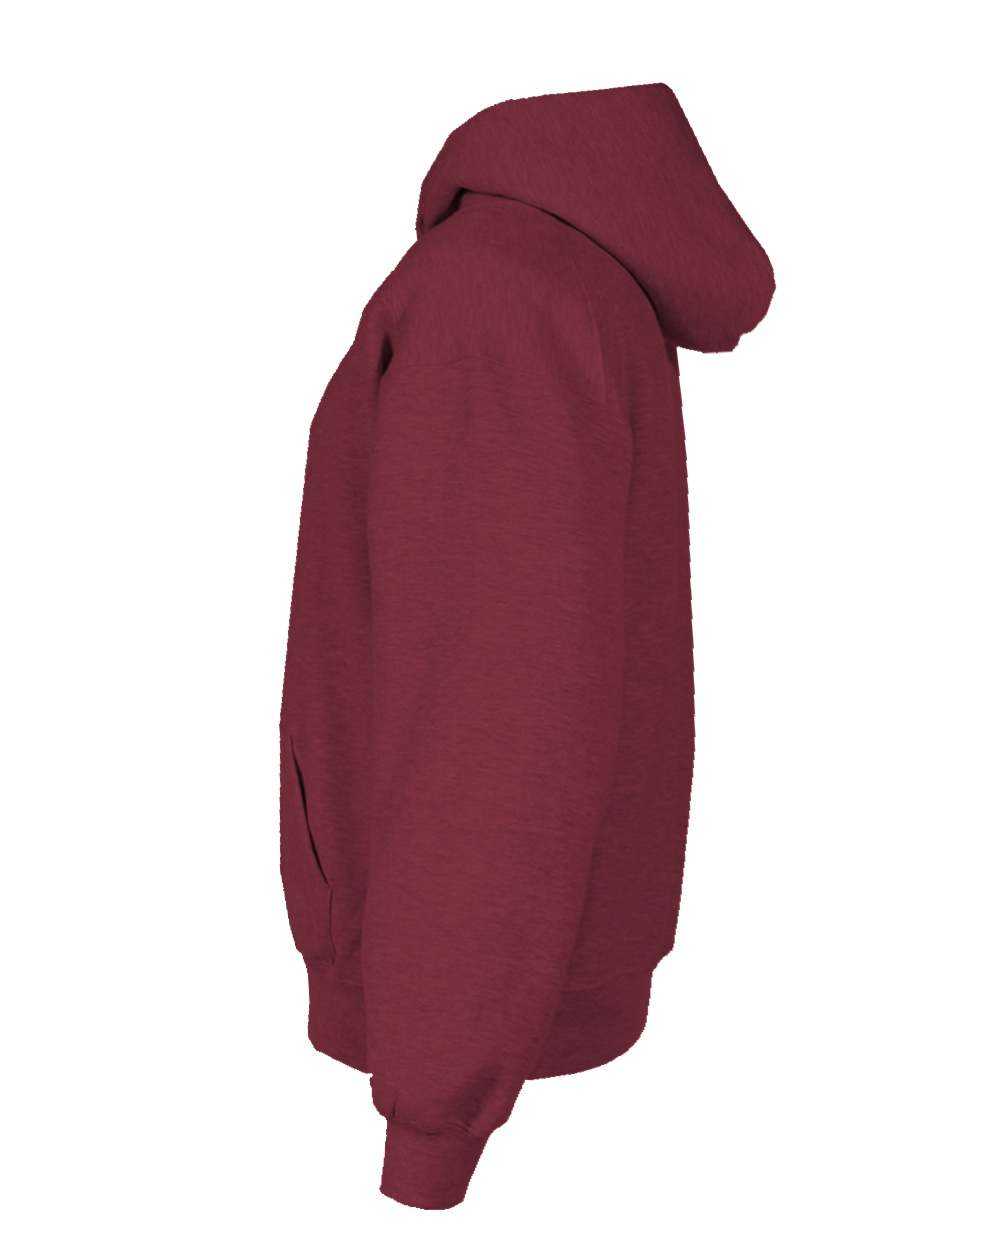 Badger Sport 2254 Youth Hooded Sweatshirt - Maroon - HIT a Double - 1